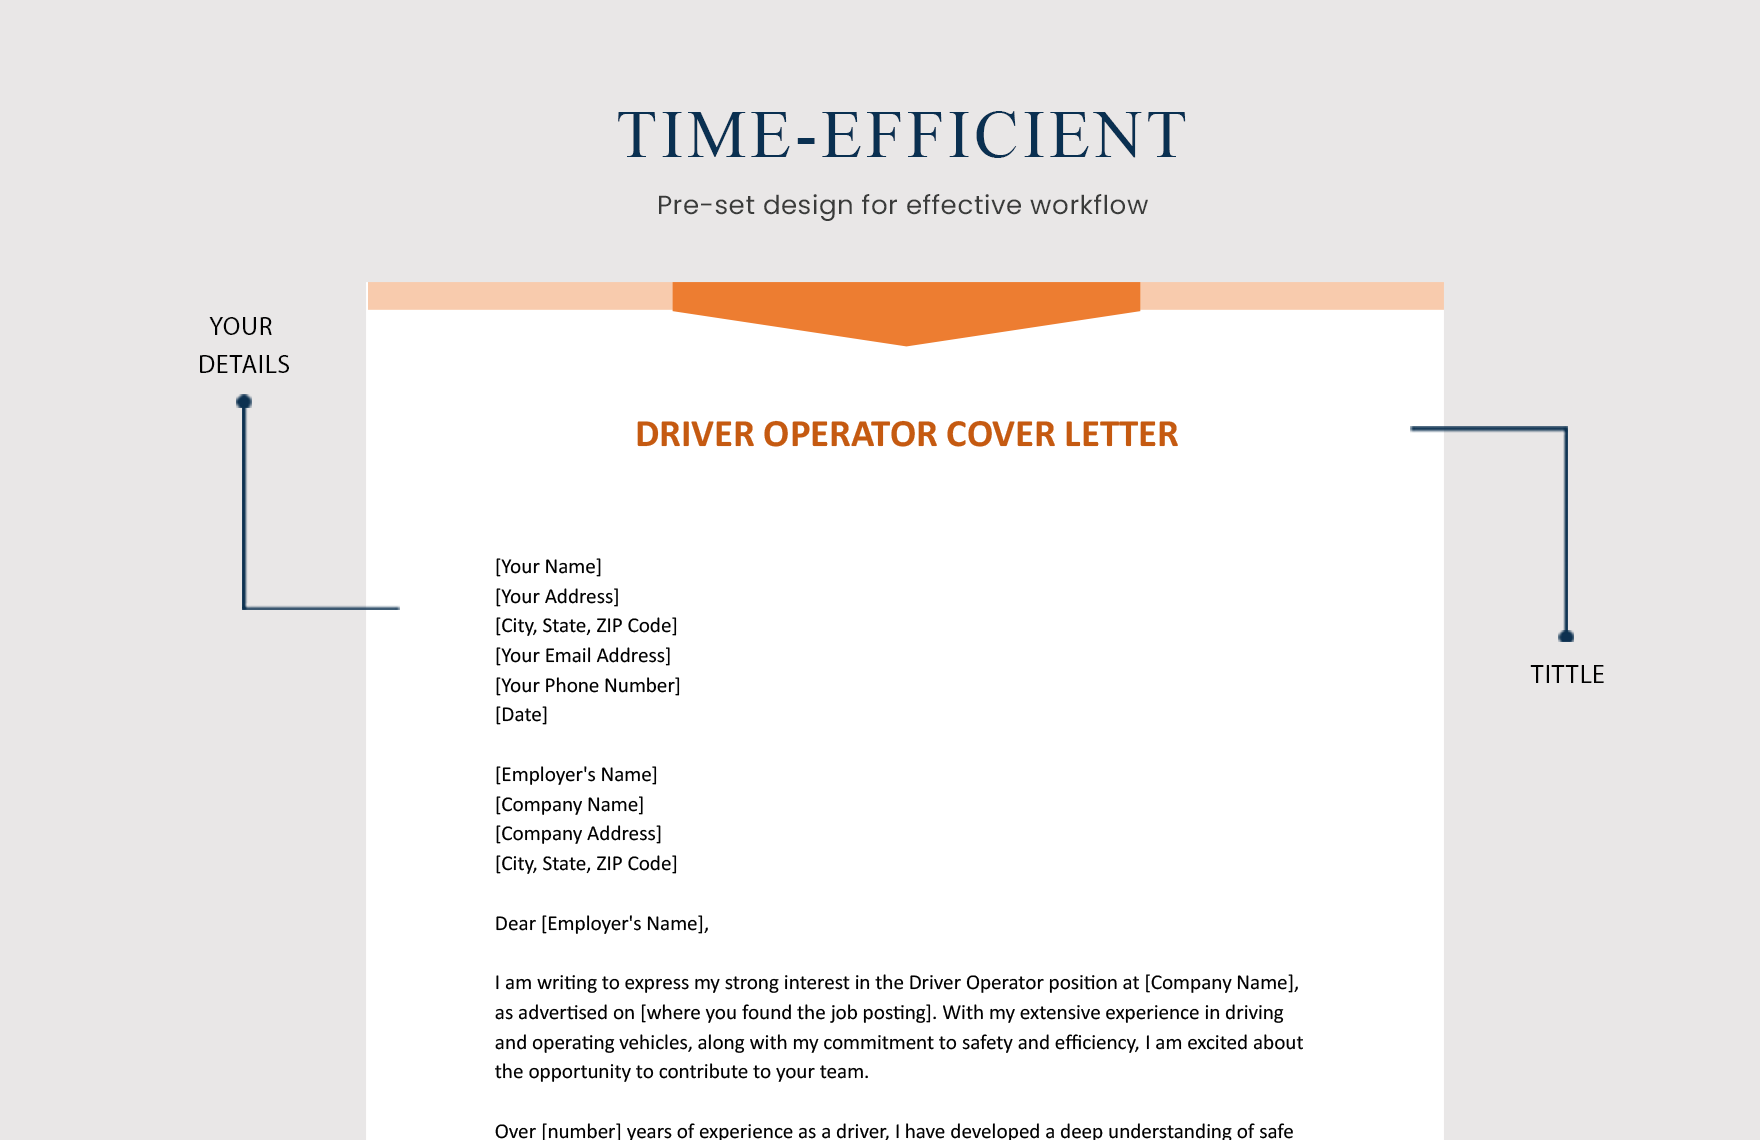 Driver Operator Cover Letter